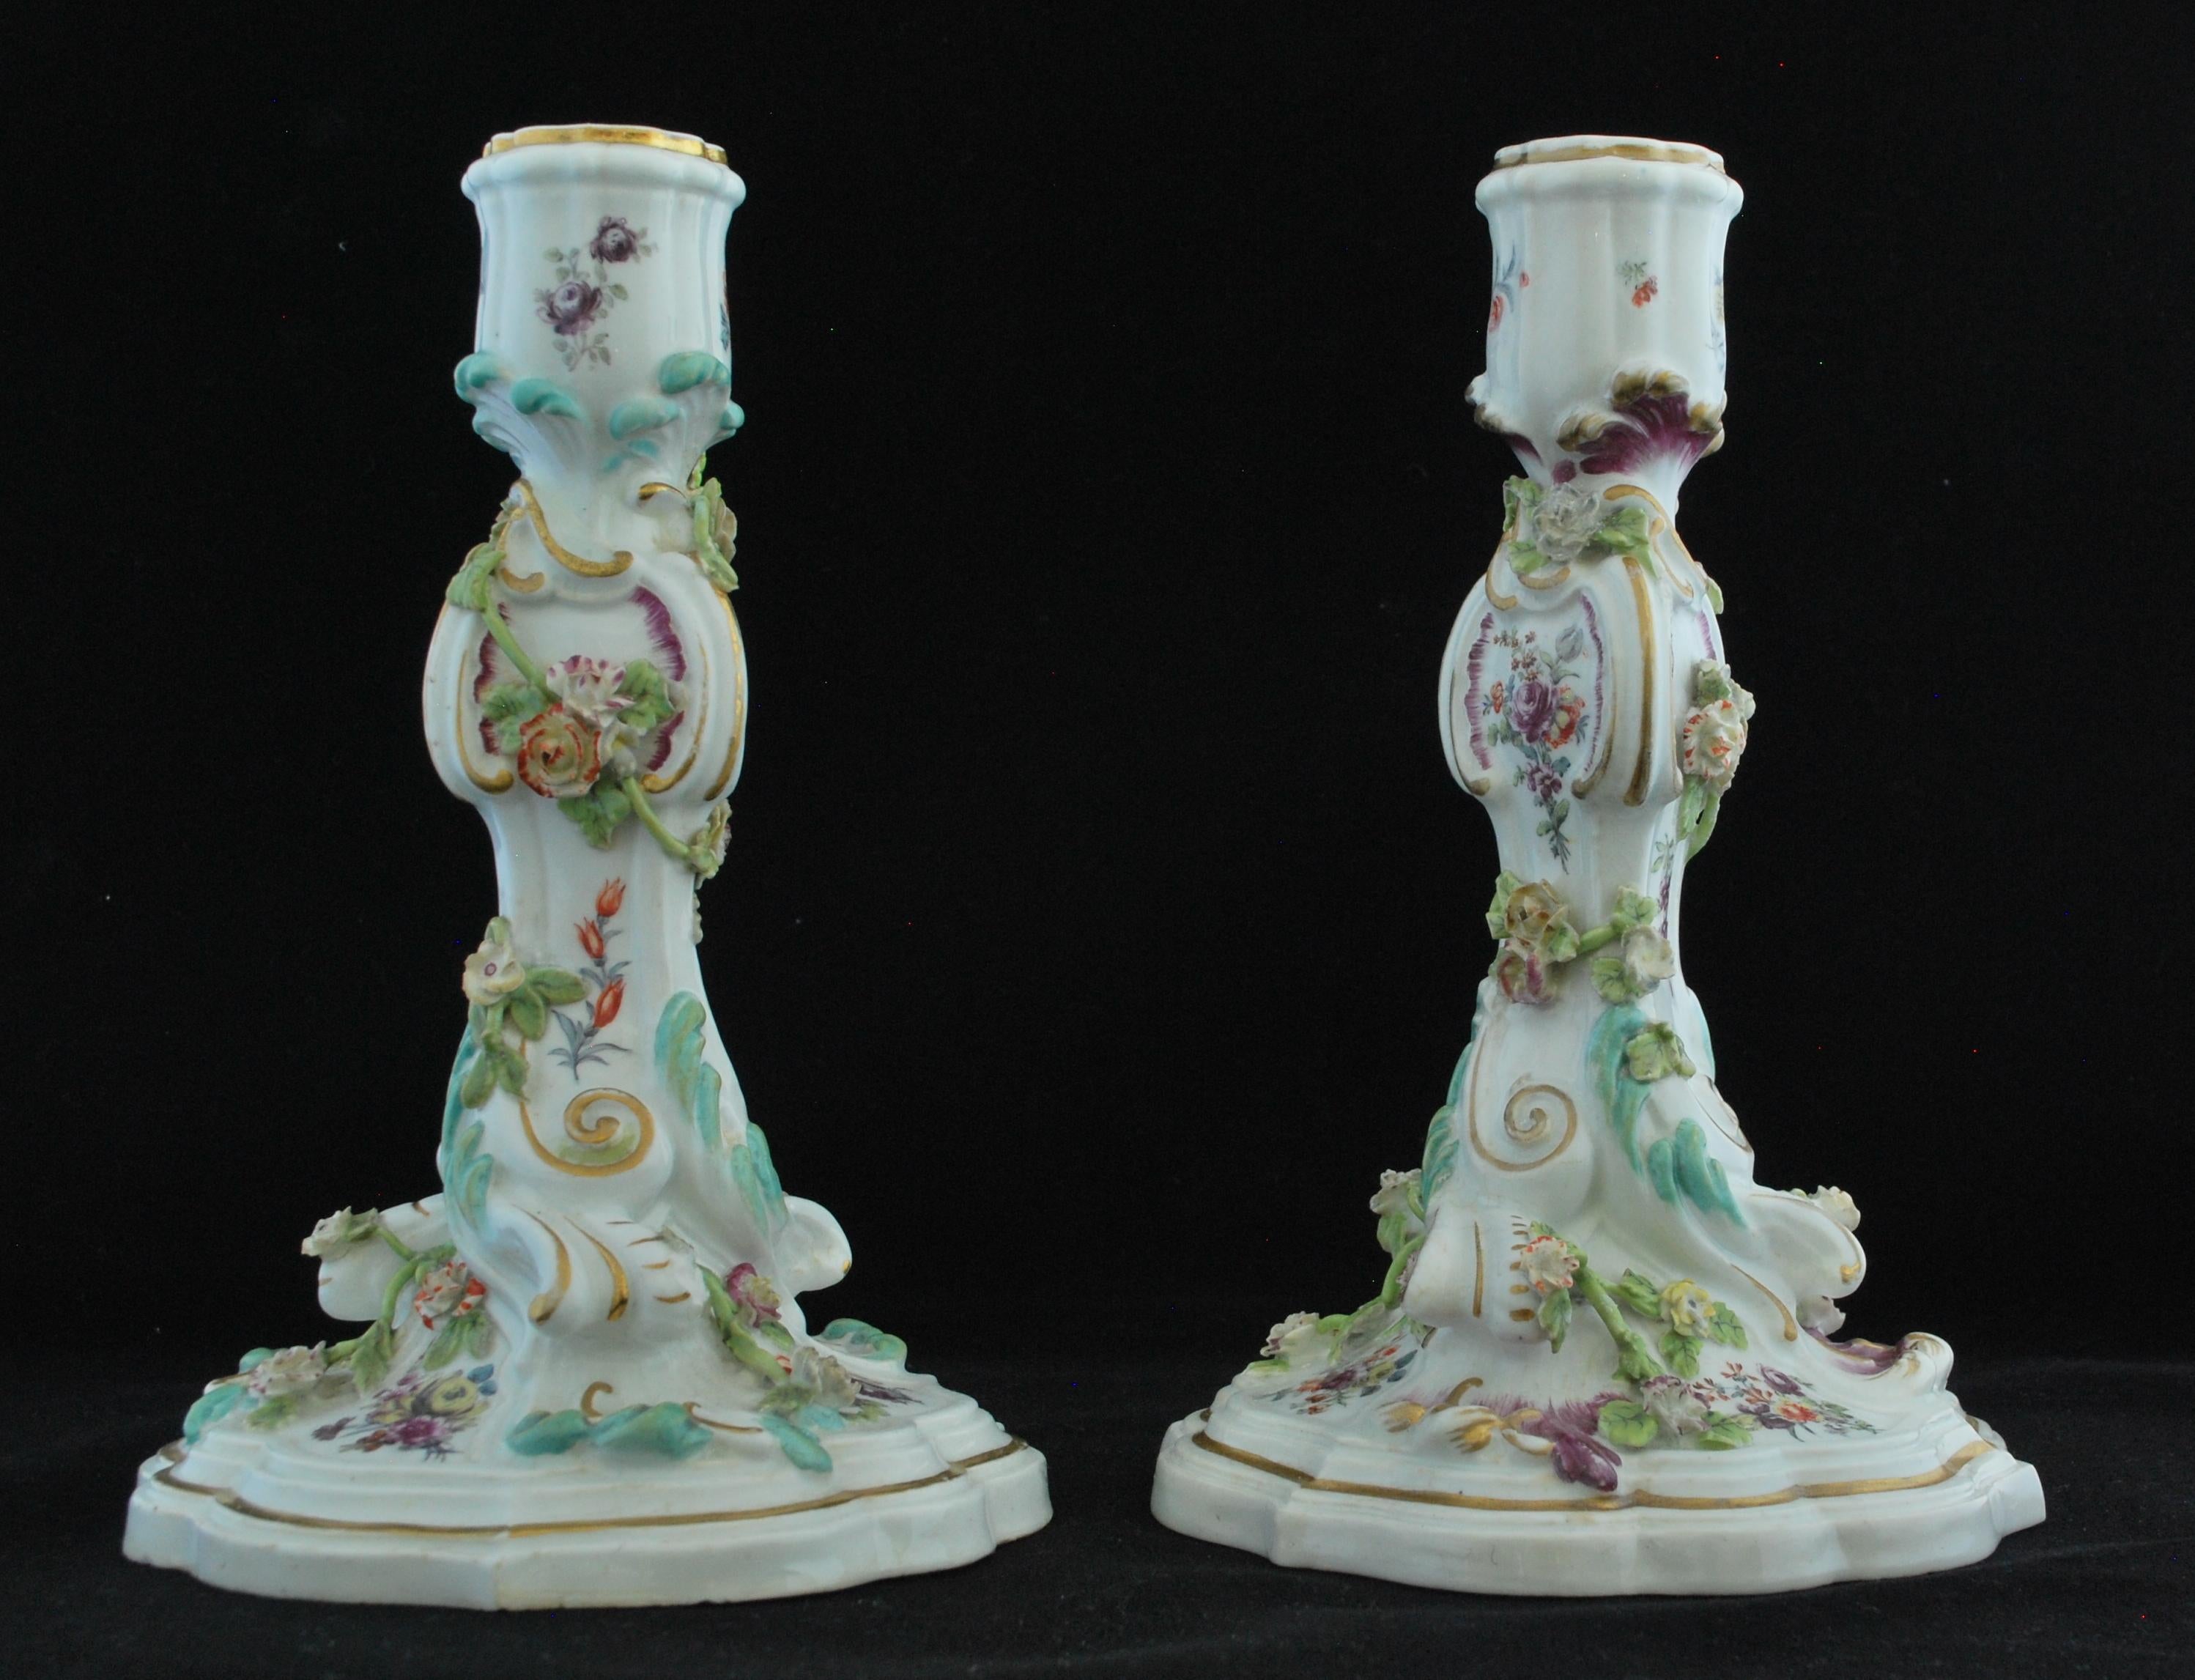 A fine pair of Rococo candlesticks, decorated with painted flowers and gilding.

Gold anchor mark.
 